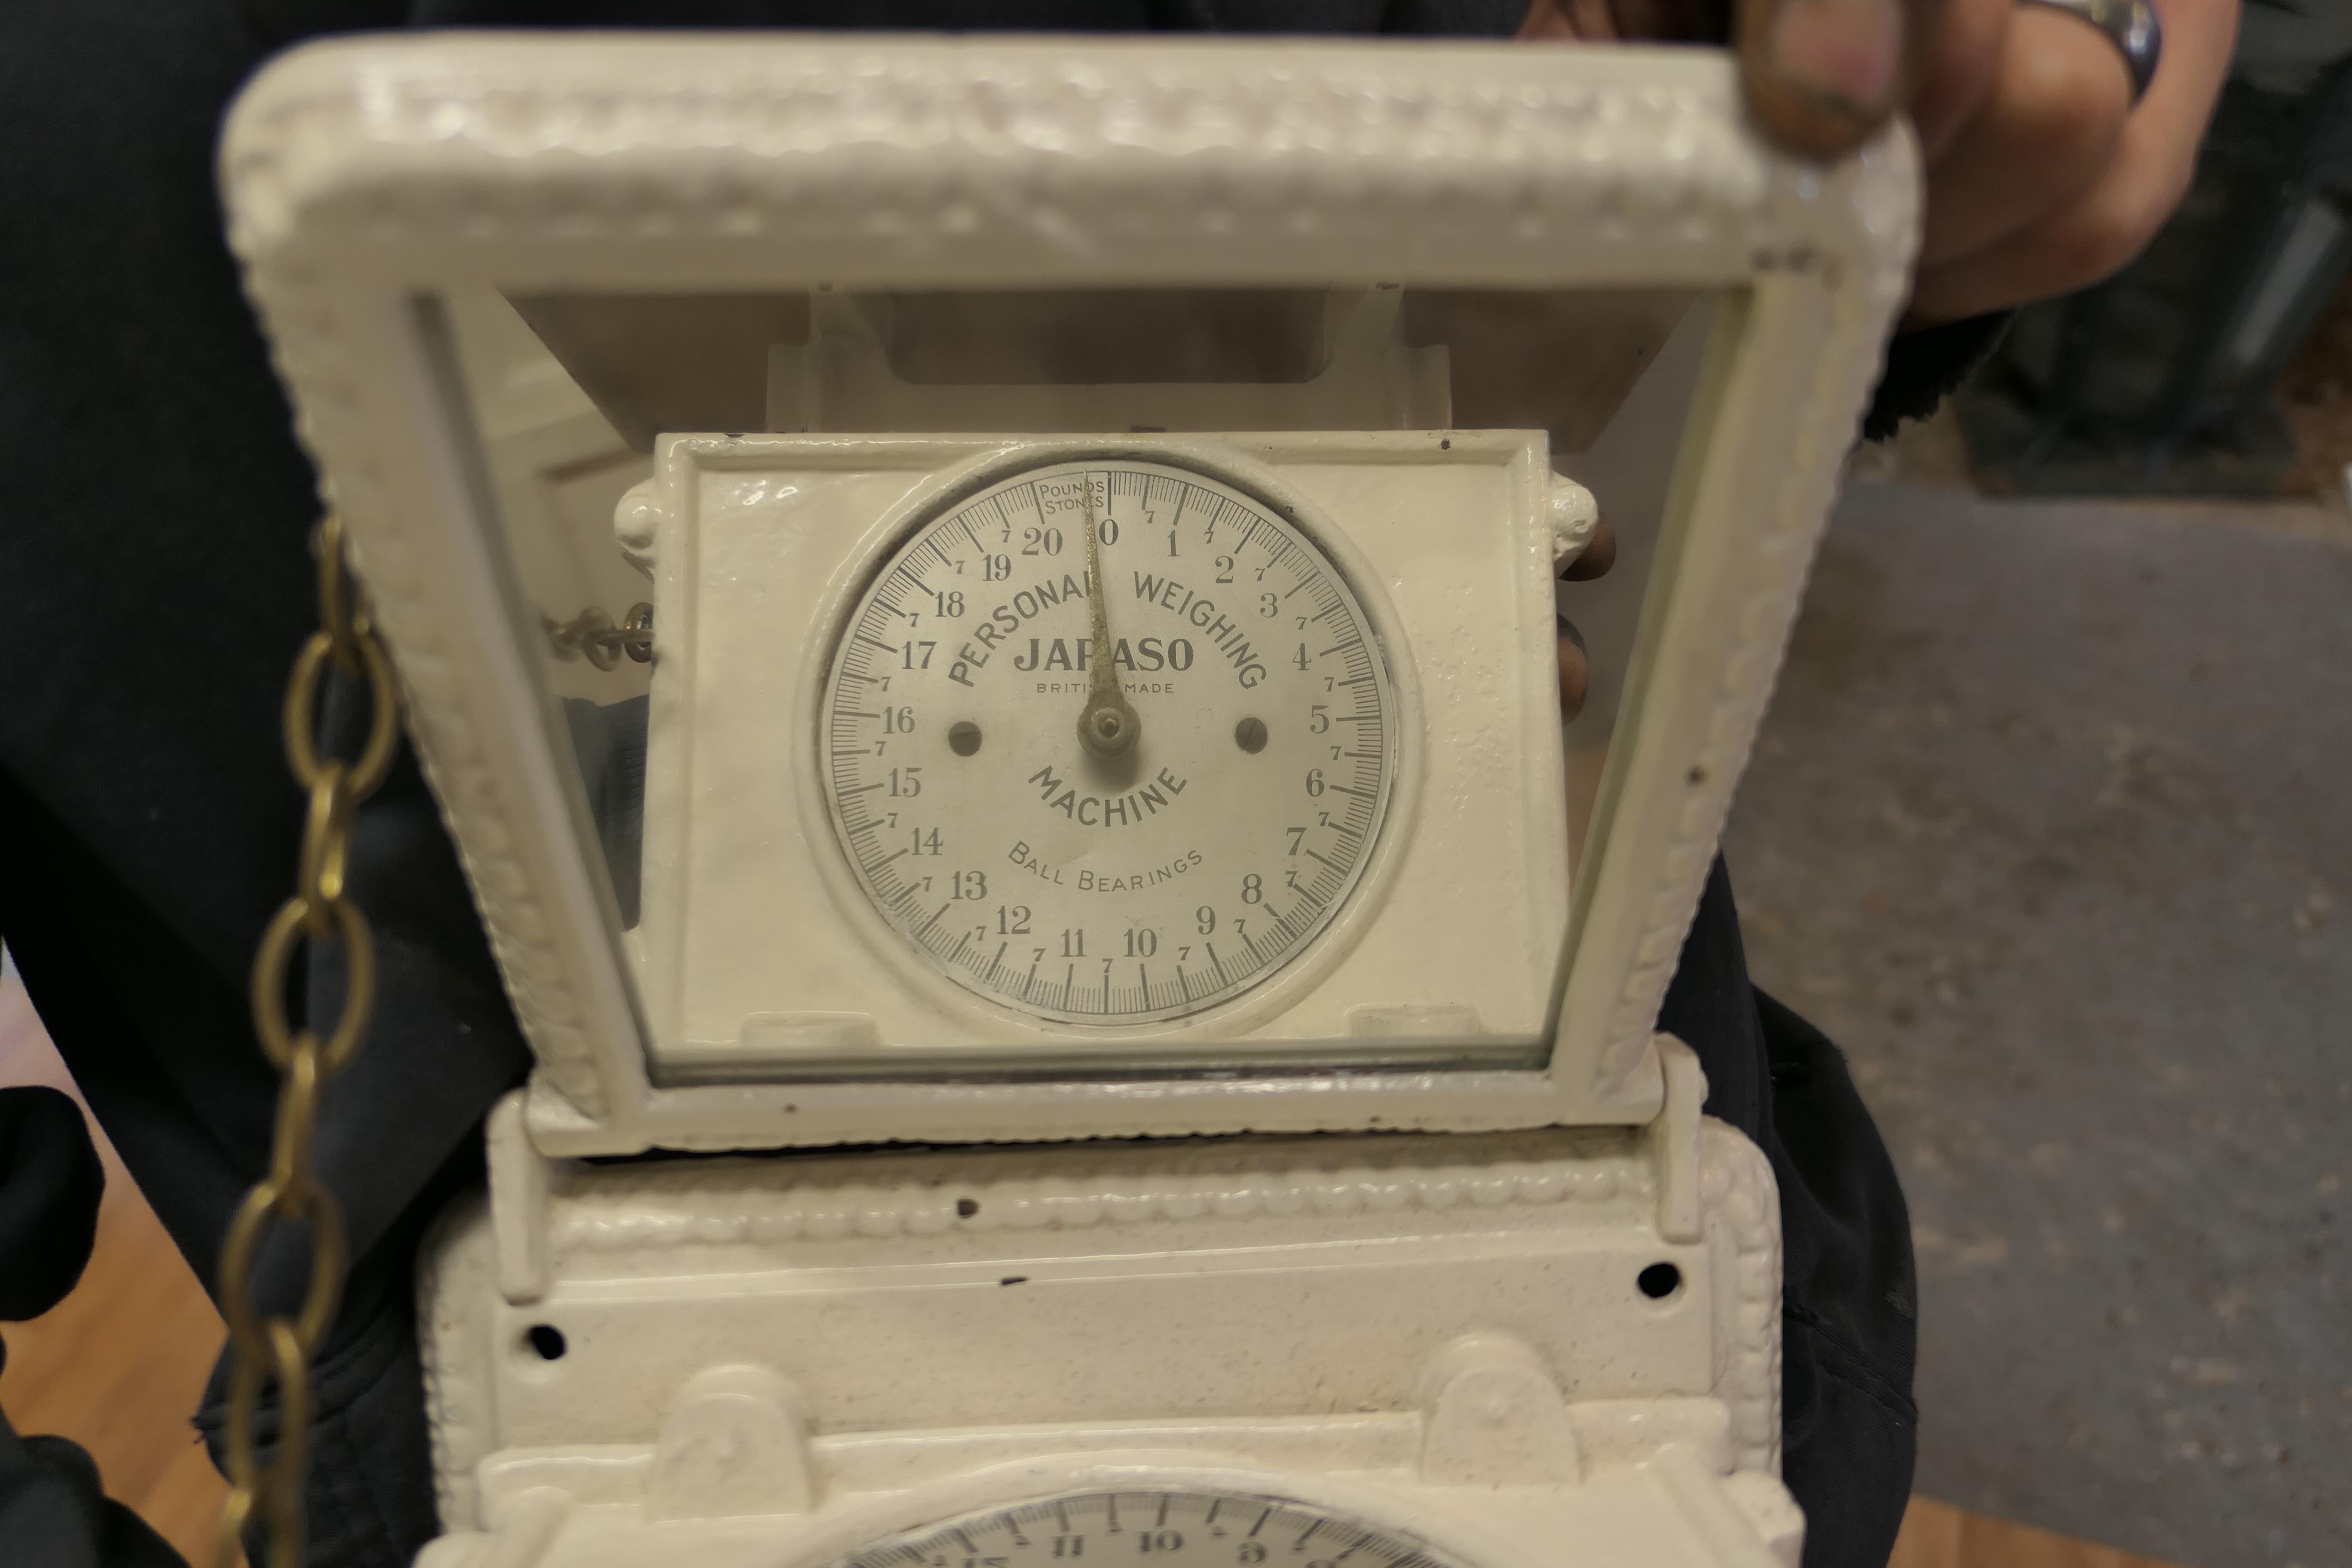 Cast Iron Personal Weighing Scales by JARASO

Quirky scales to keep your weight personal, the weight registered by the scales can only be correctly viewed by the user by the mirror. The scales seem to be in working order 
The Scale is 8” high, 11”